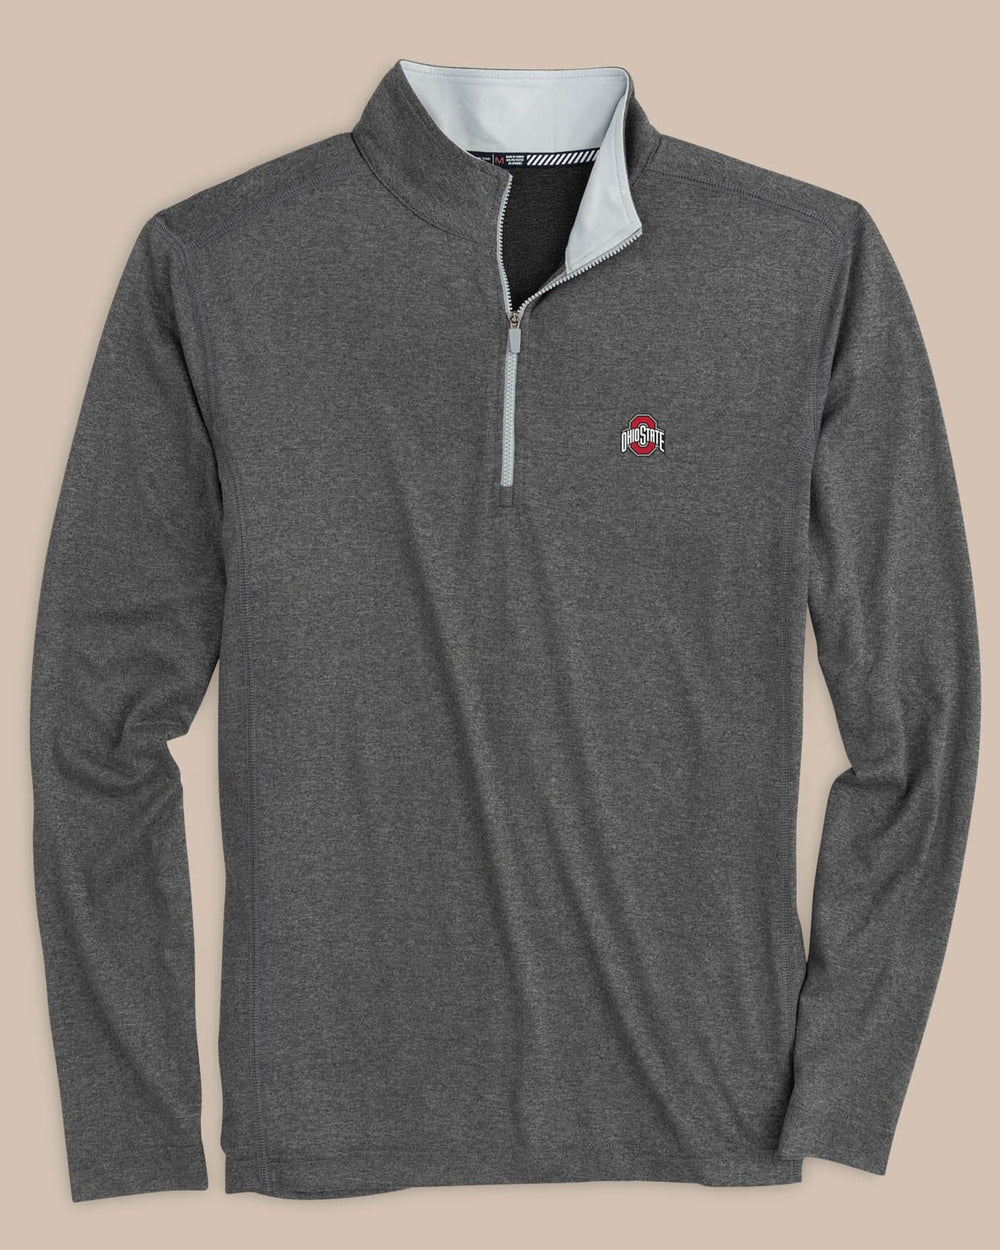 The front view of the Men's Ohio State Buckeyes Flanker Quarter Zip Pullover by Southern Tide - Heather Polarized Grey